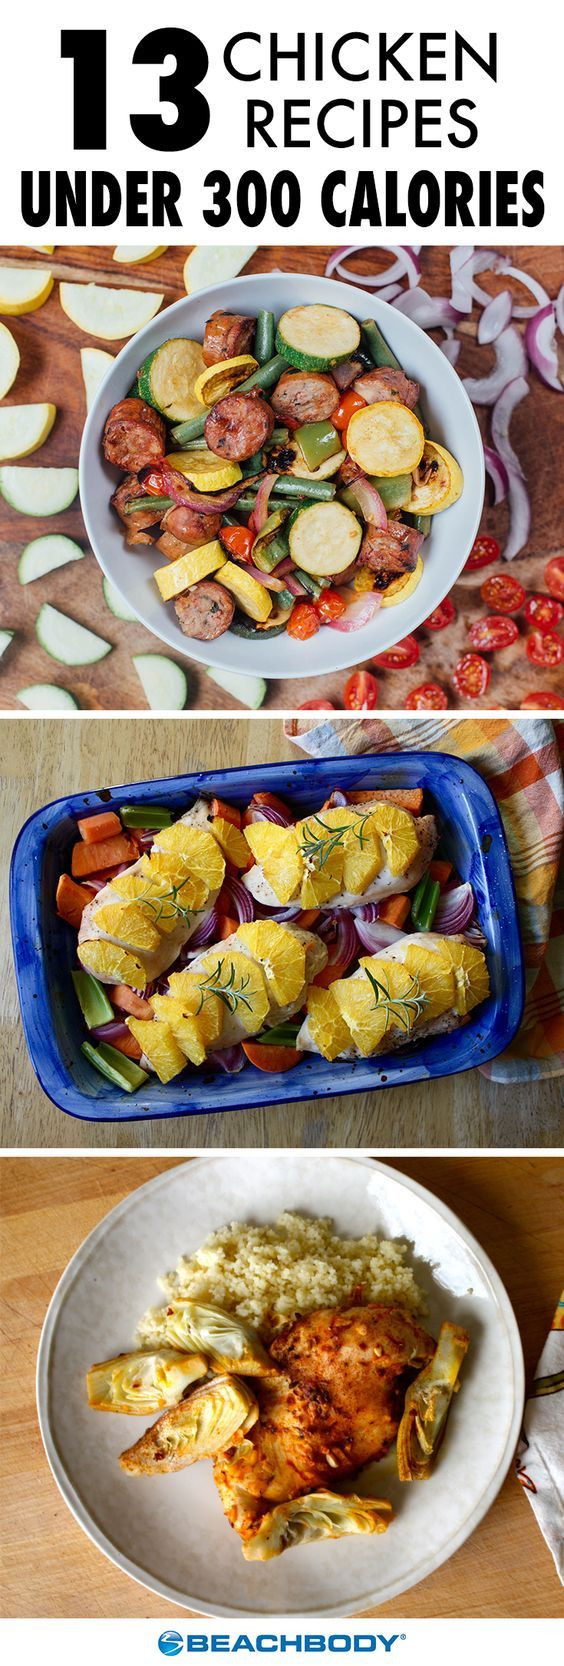 Healthy Lunches Under 300 Calories
 257 best images about Delicious Dinners on Pinterest